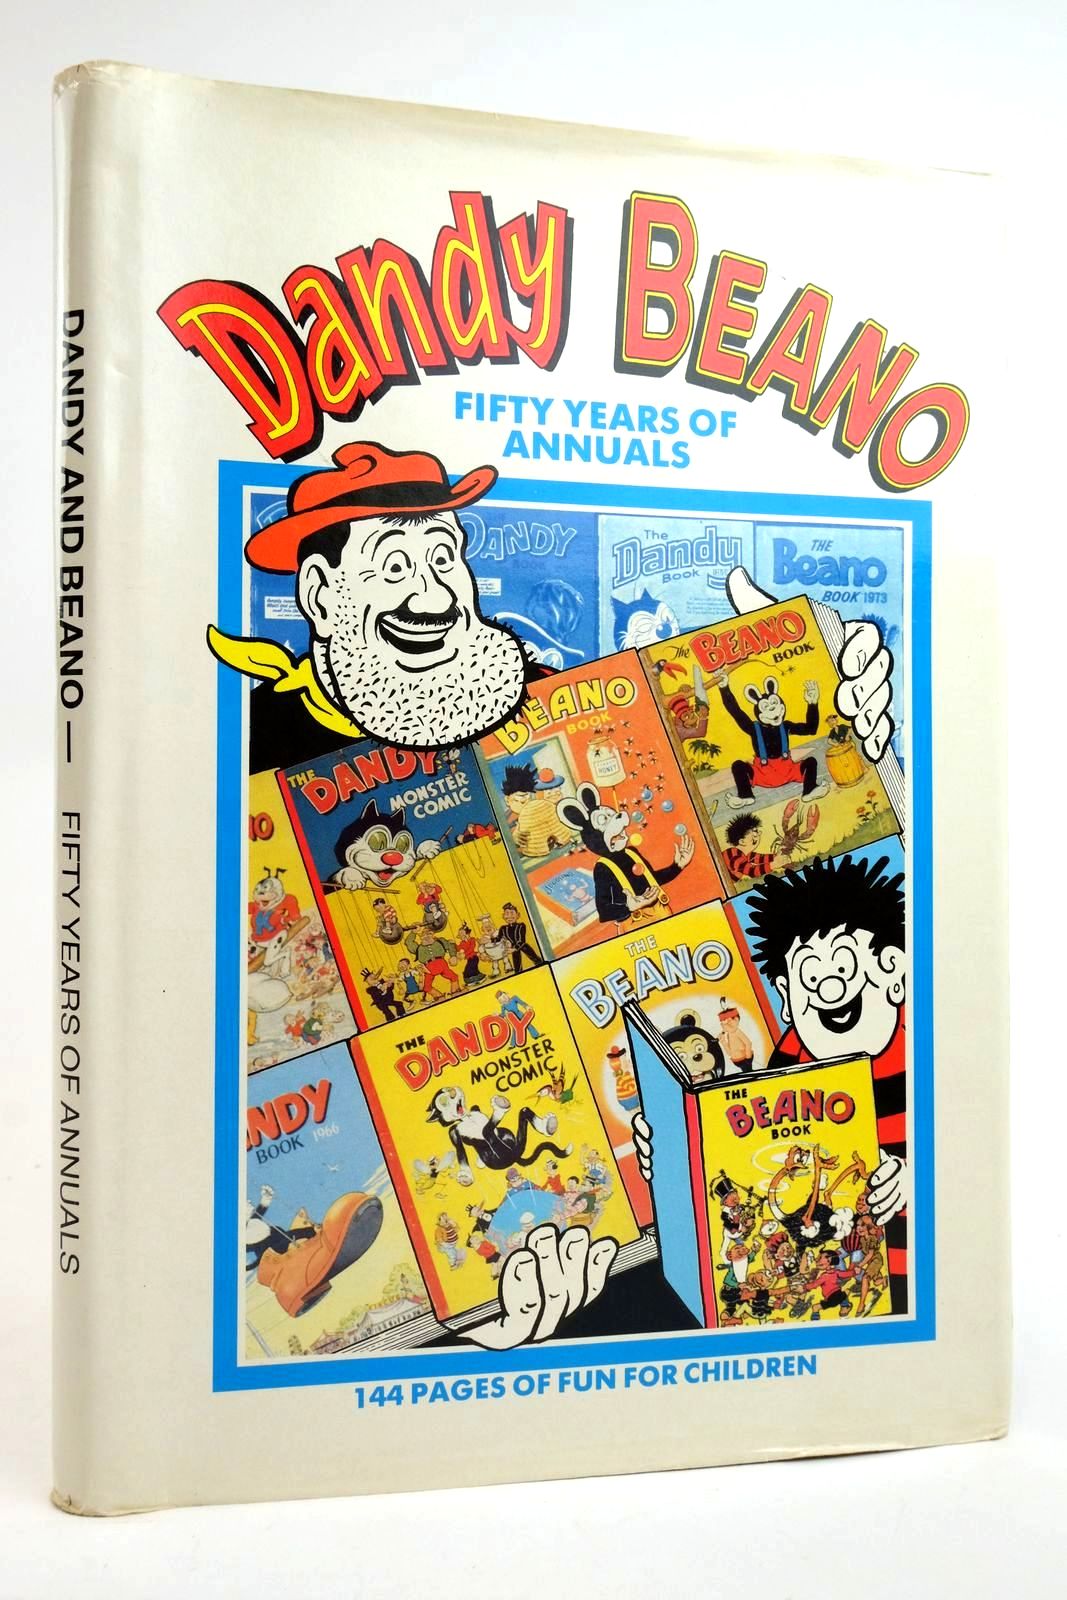 Photo of DANDY AND BEANO - FIFTY YEARS OF ANNUALS published by D.C. Thomson &amp; Co Ltd. (STOCK CODE: 2135840)  for sale by Stella & Rose's Books